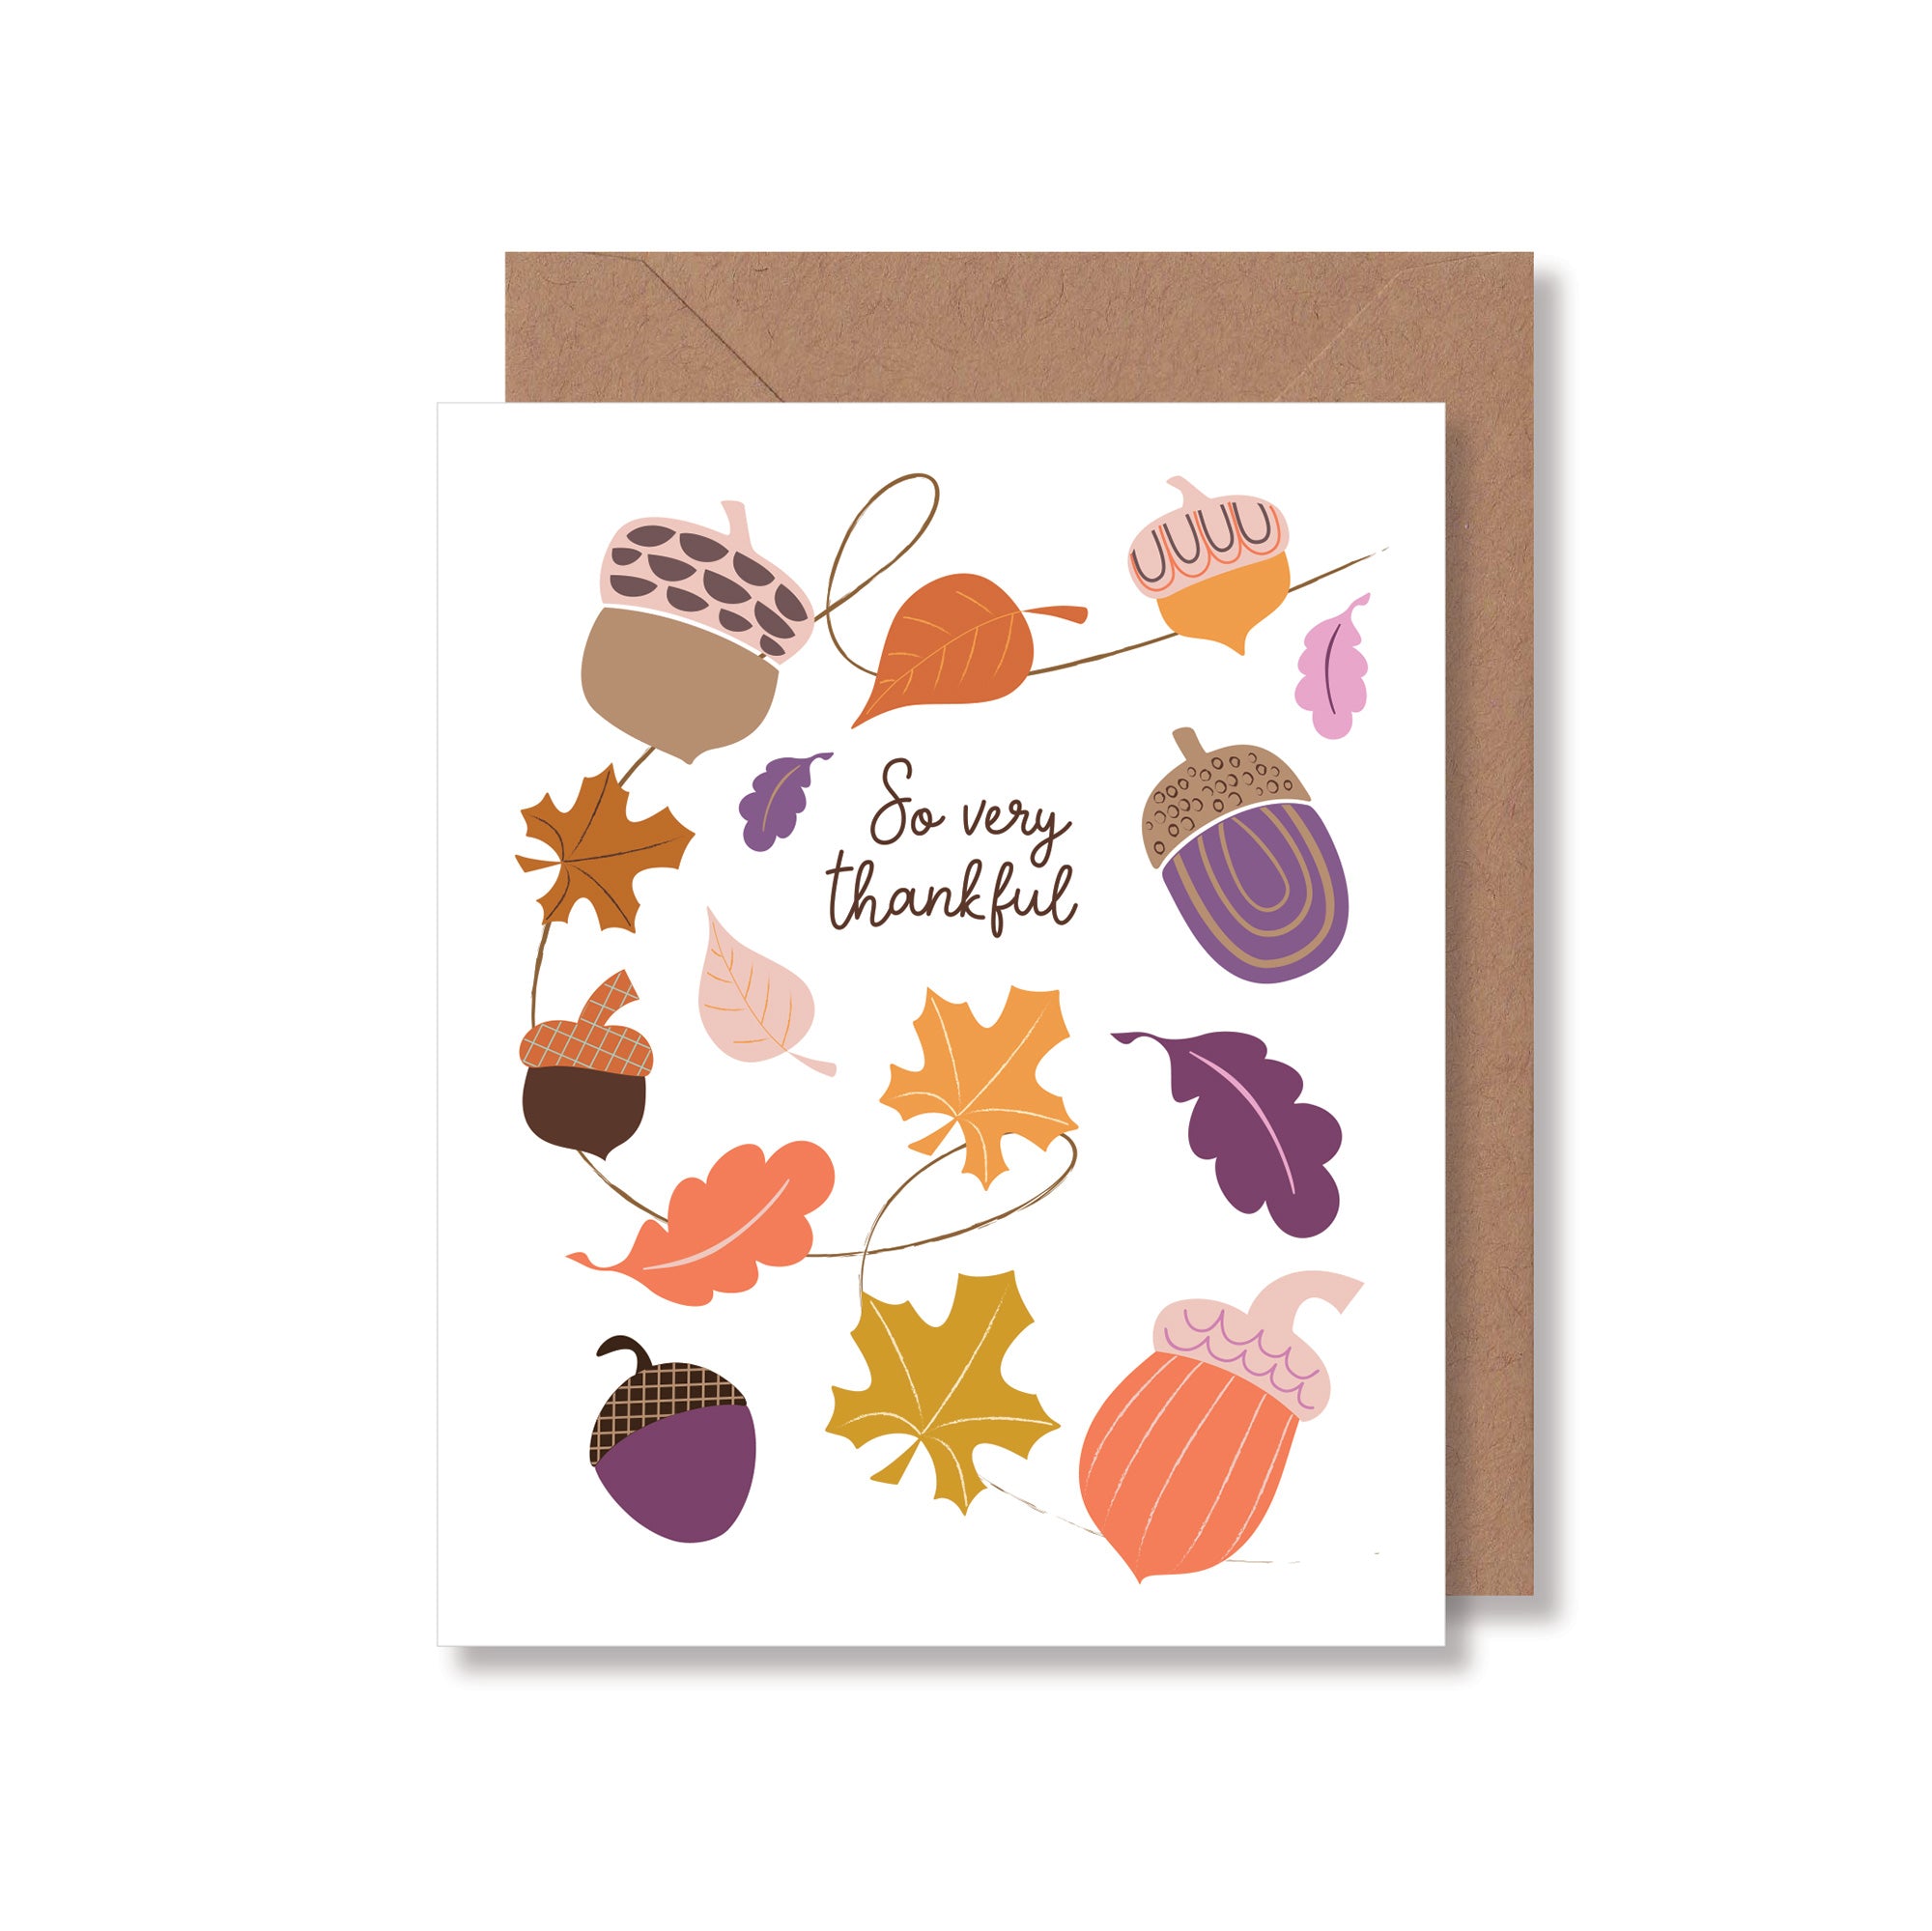 Autumn acorns thank you greeting card design by Gigglemugg